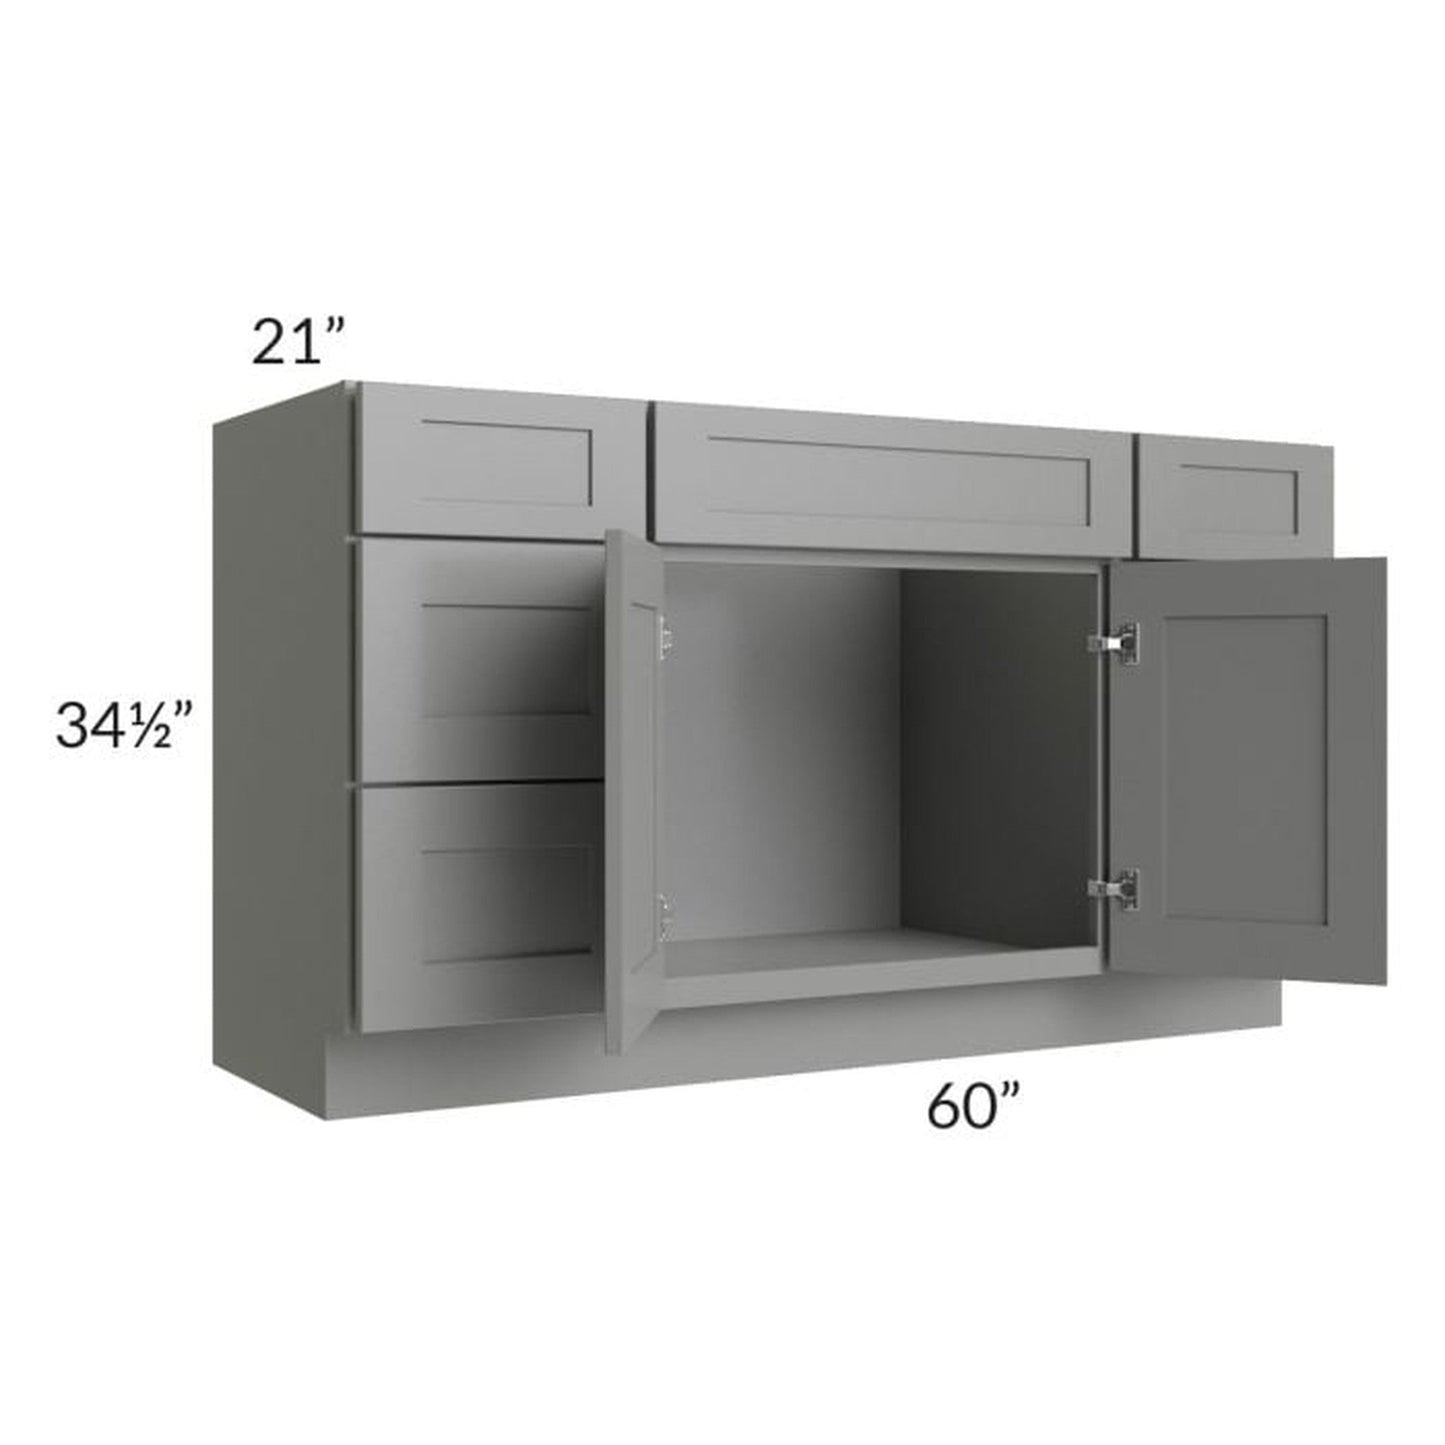 RTA Shale Grey Shaker 60" Vanity Sink Base Cabinet with Drawers PS-V6021DD with 2 Decorative End Panels